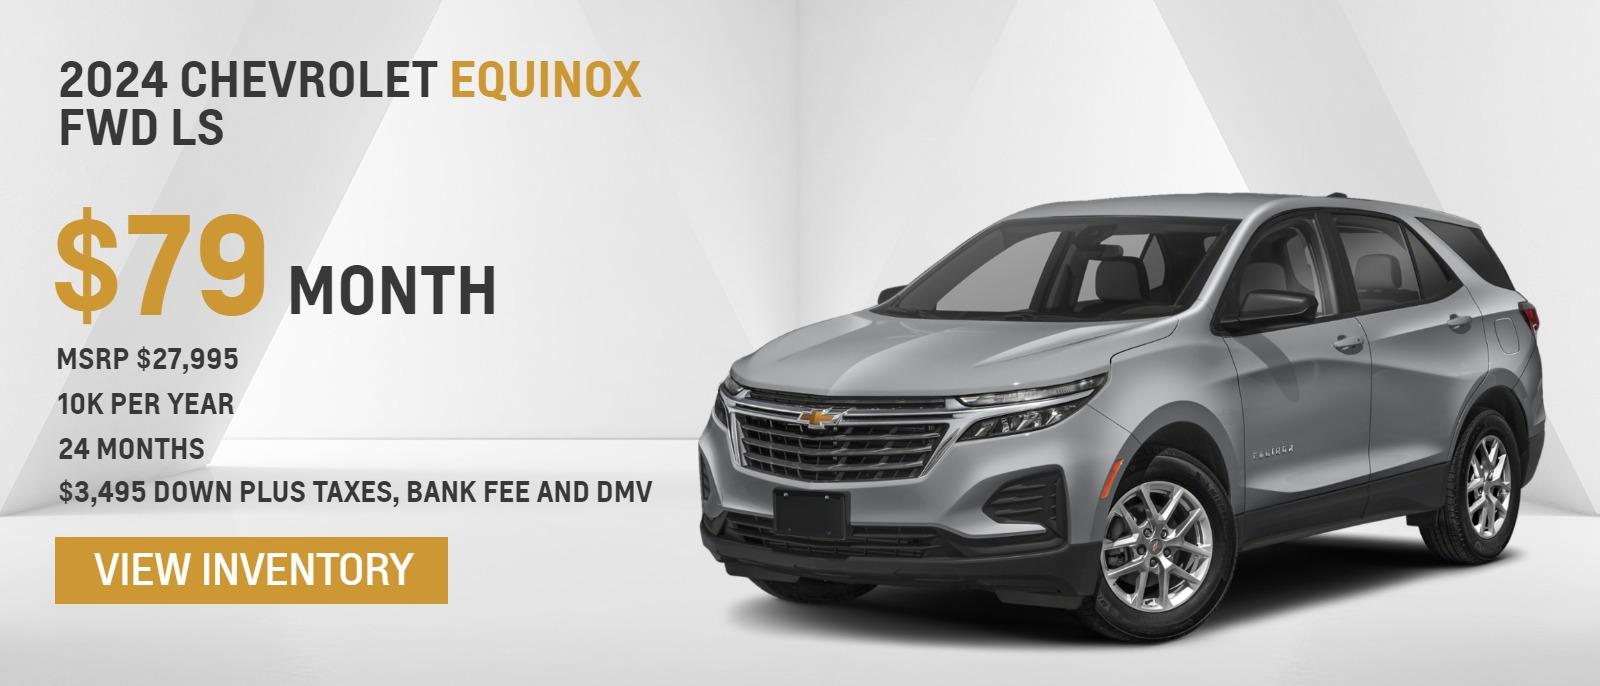 2024 Chevrolet Equinox FWD LS
MSRP $27,995.
10k per year
24 months
$79. month
$3,495 down plus taxes, bank fee and DMV